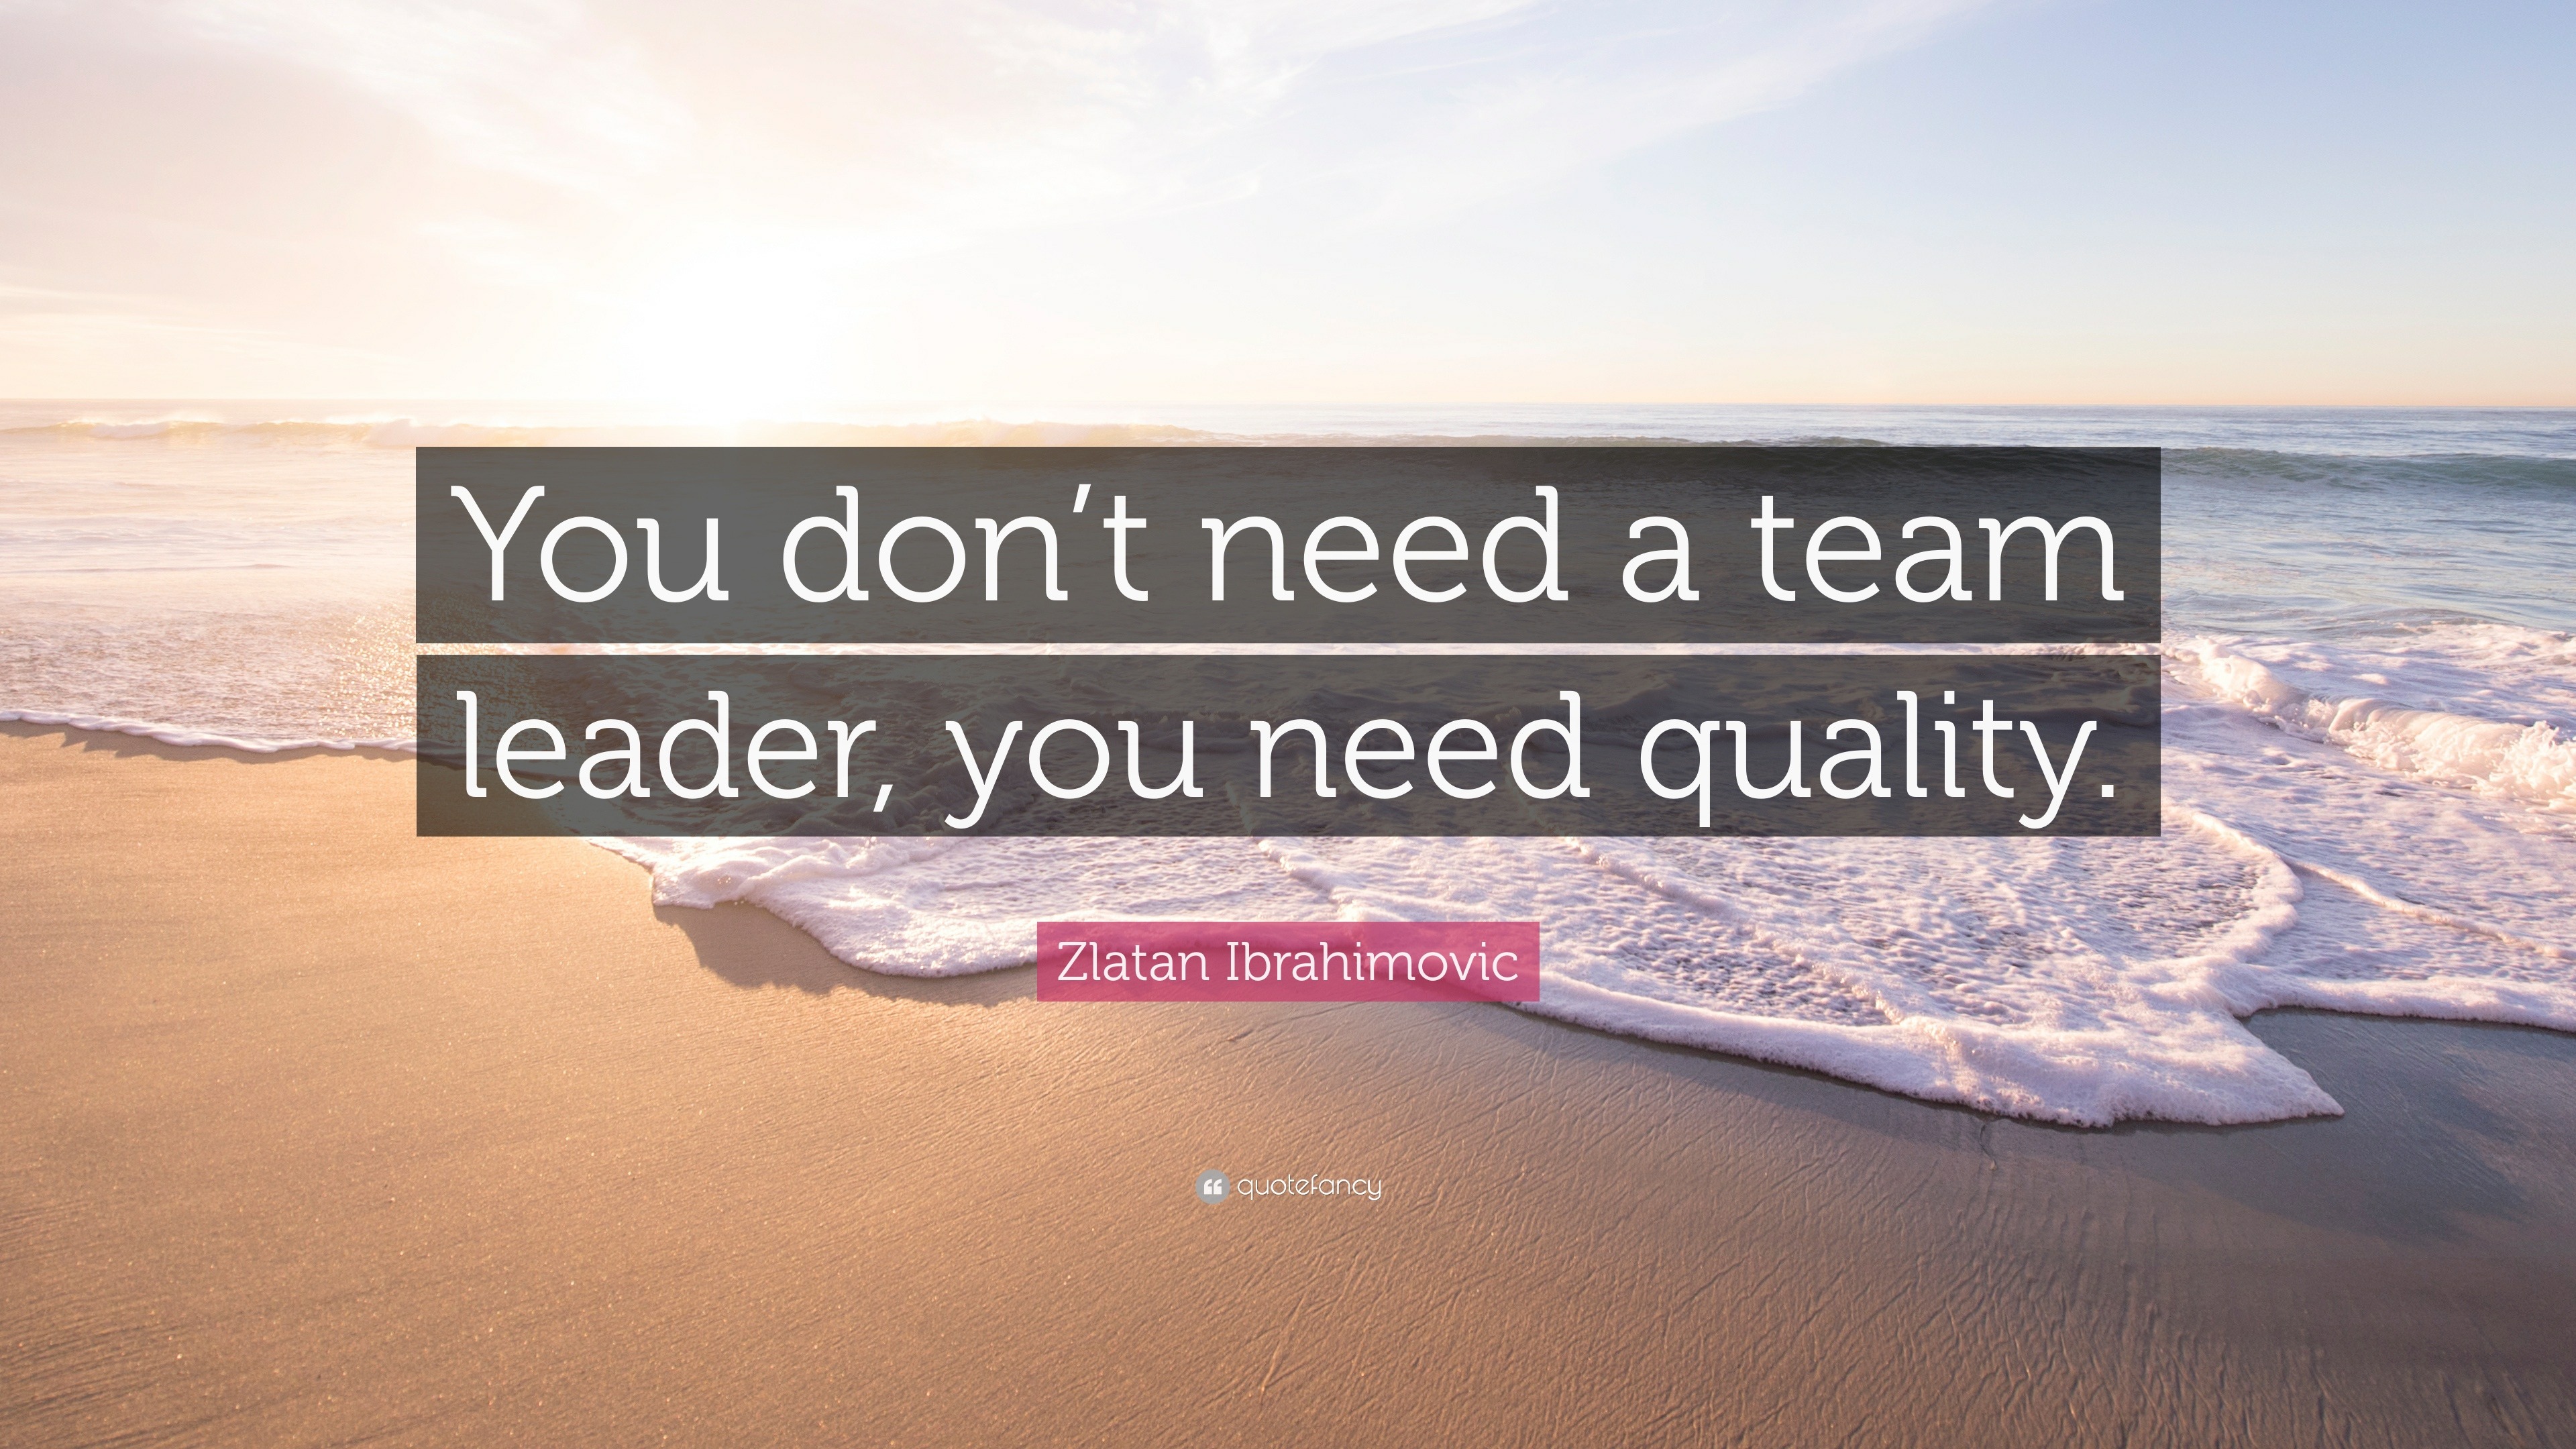 You don’t need a team leader, you need quality. 